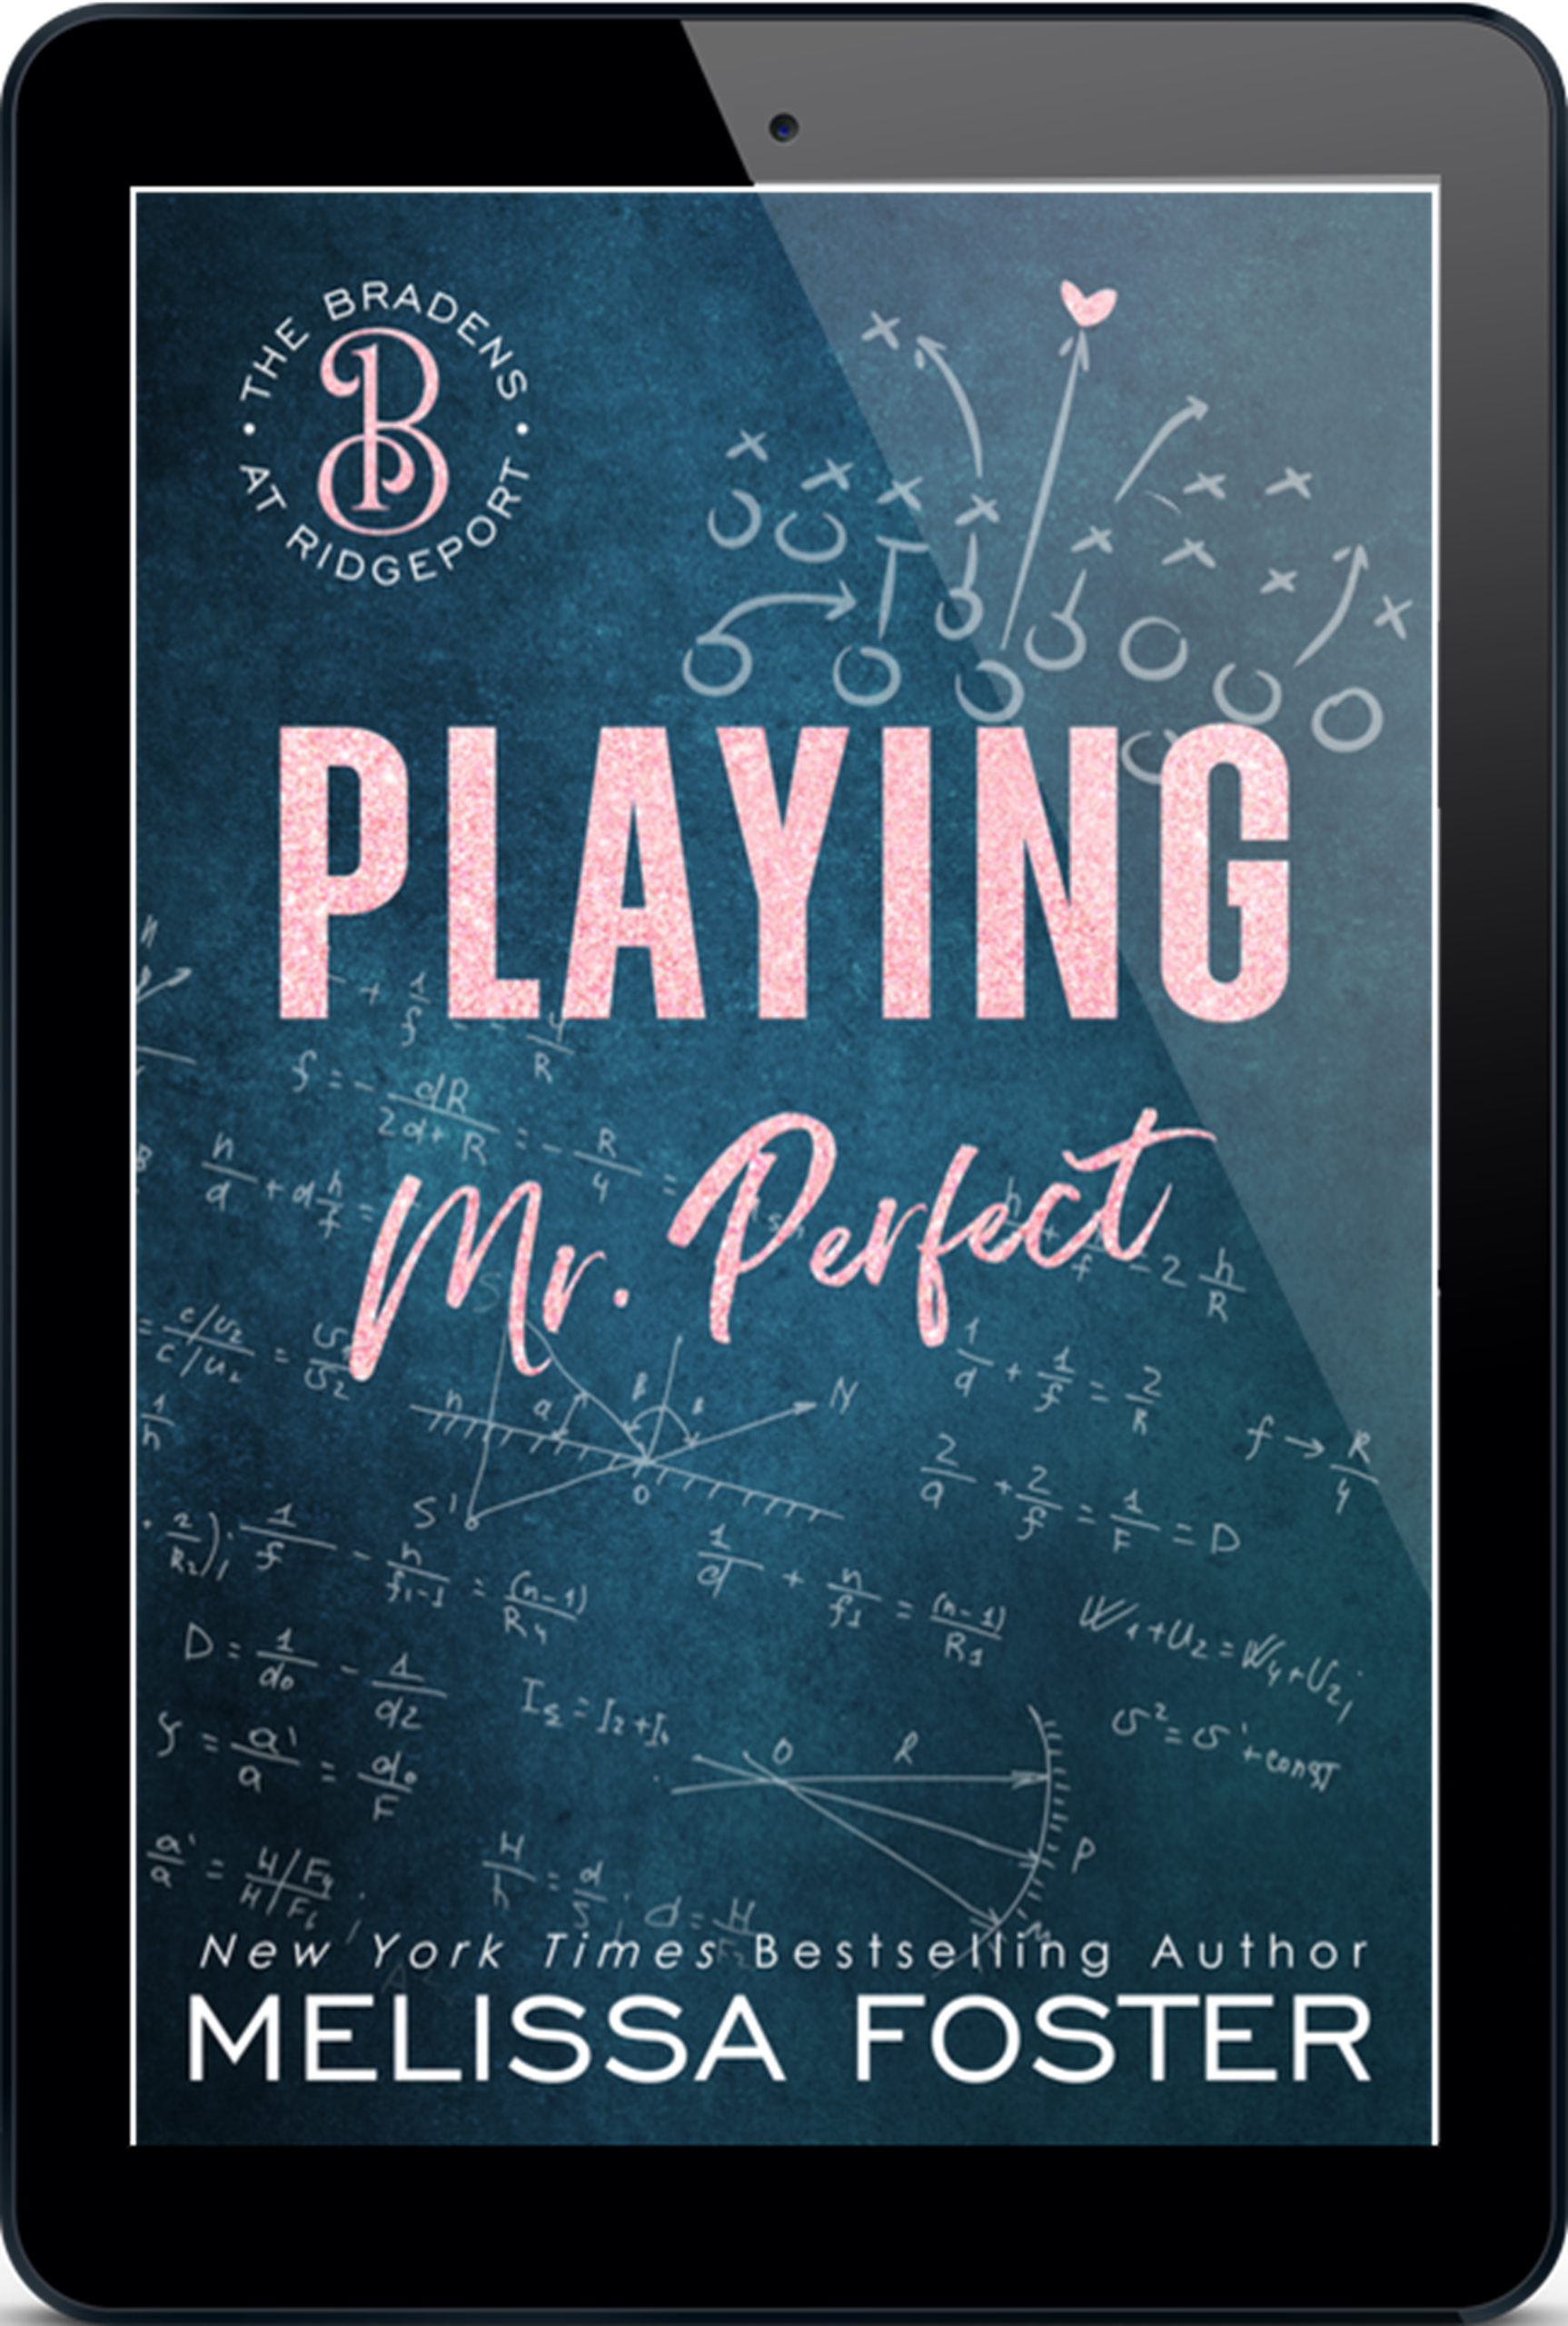 Playing Mr. Perfect Special Edition by Melissa Foster